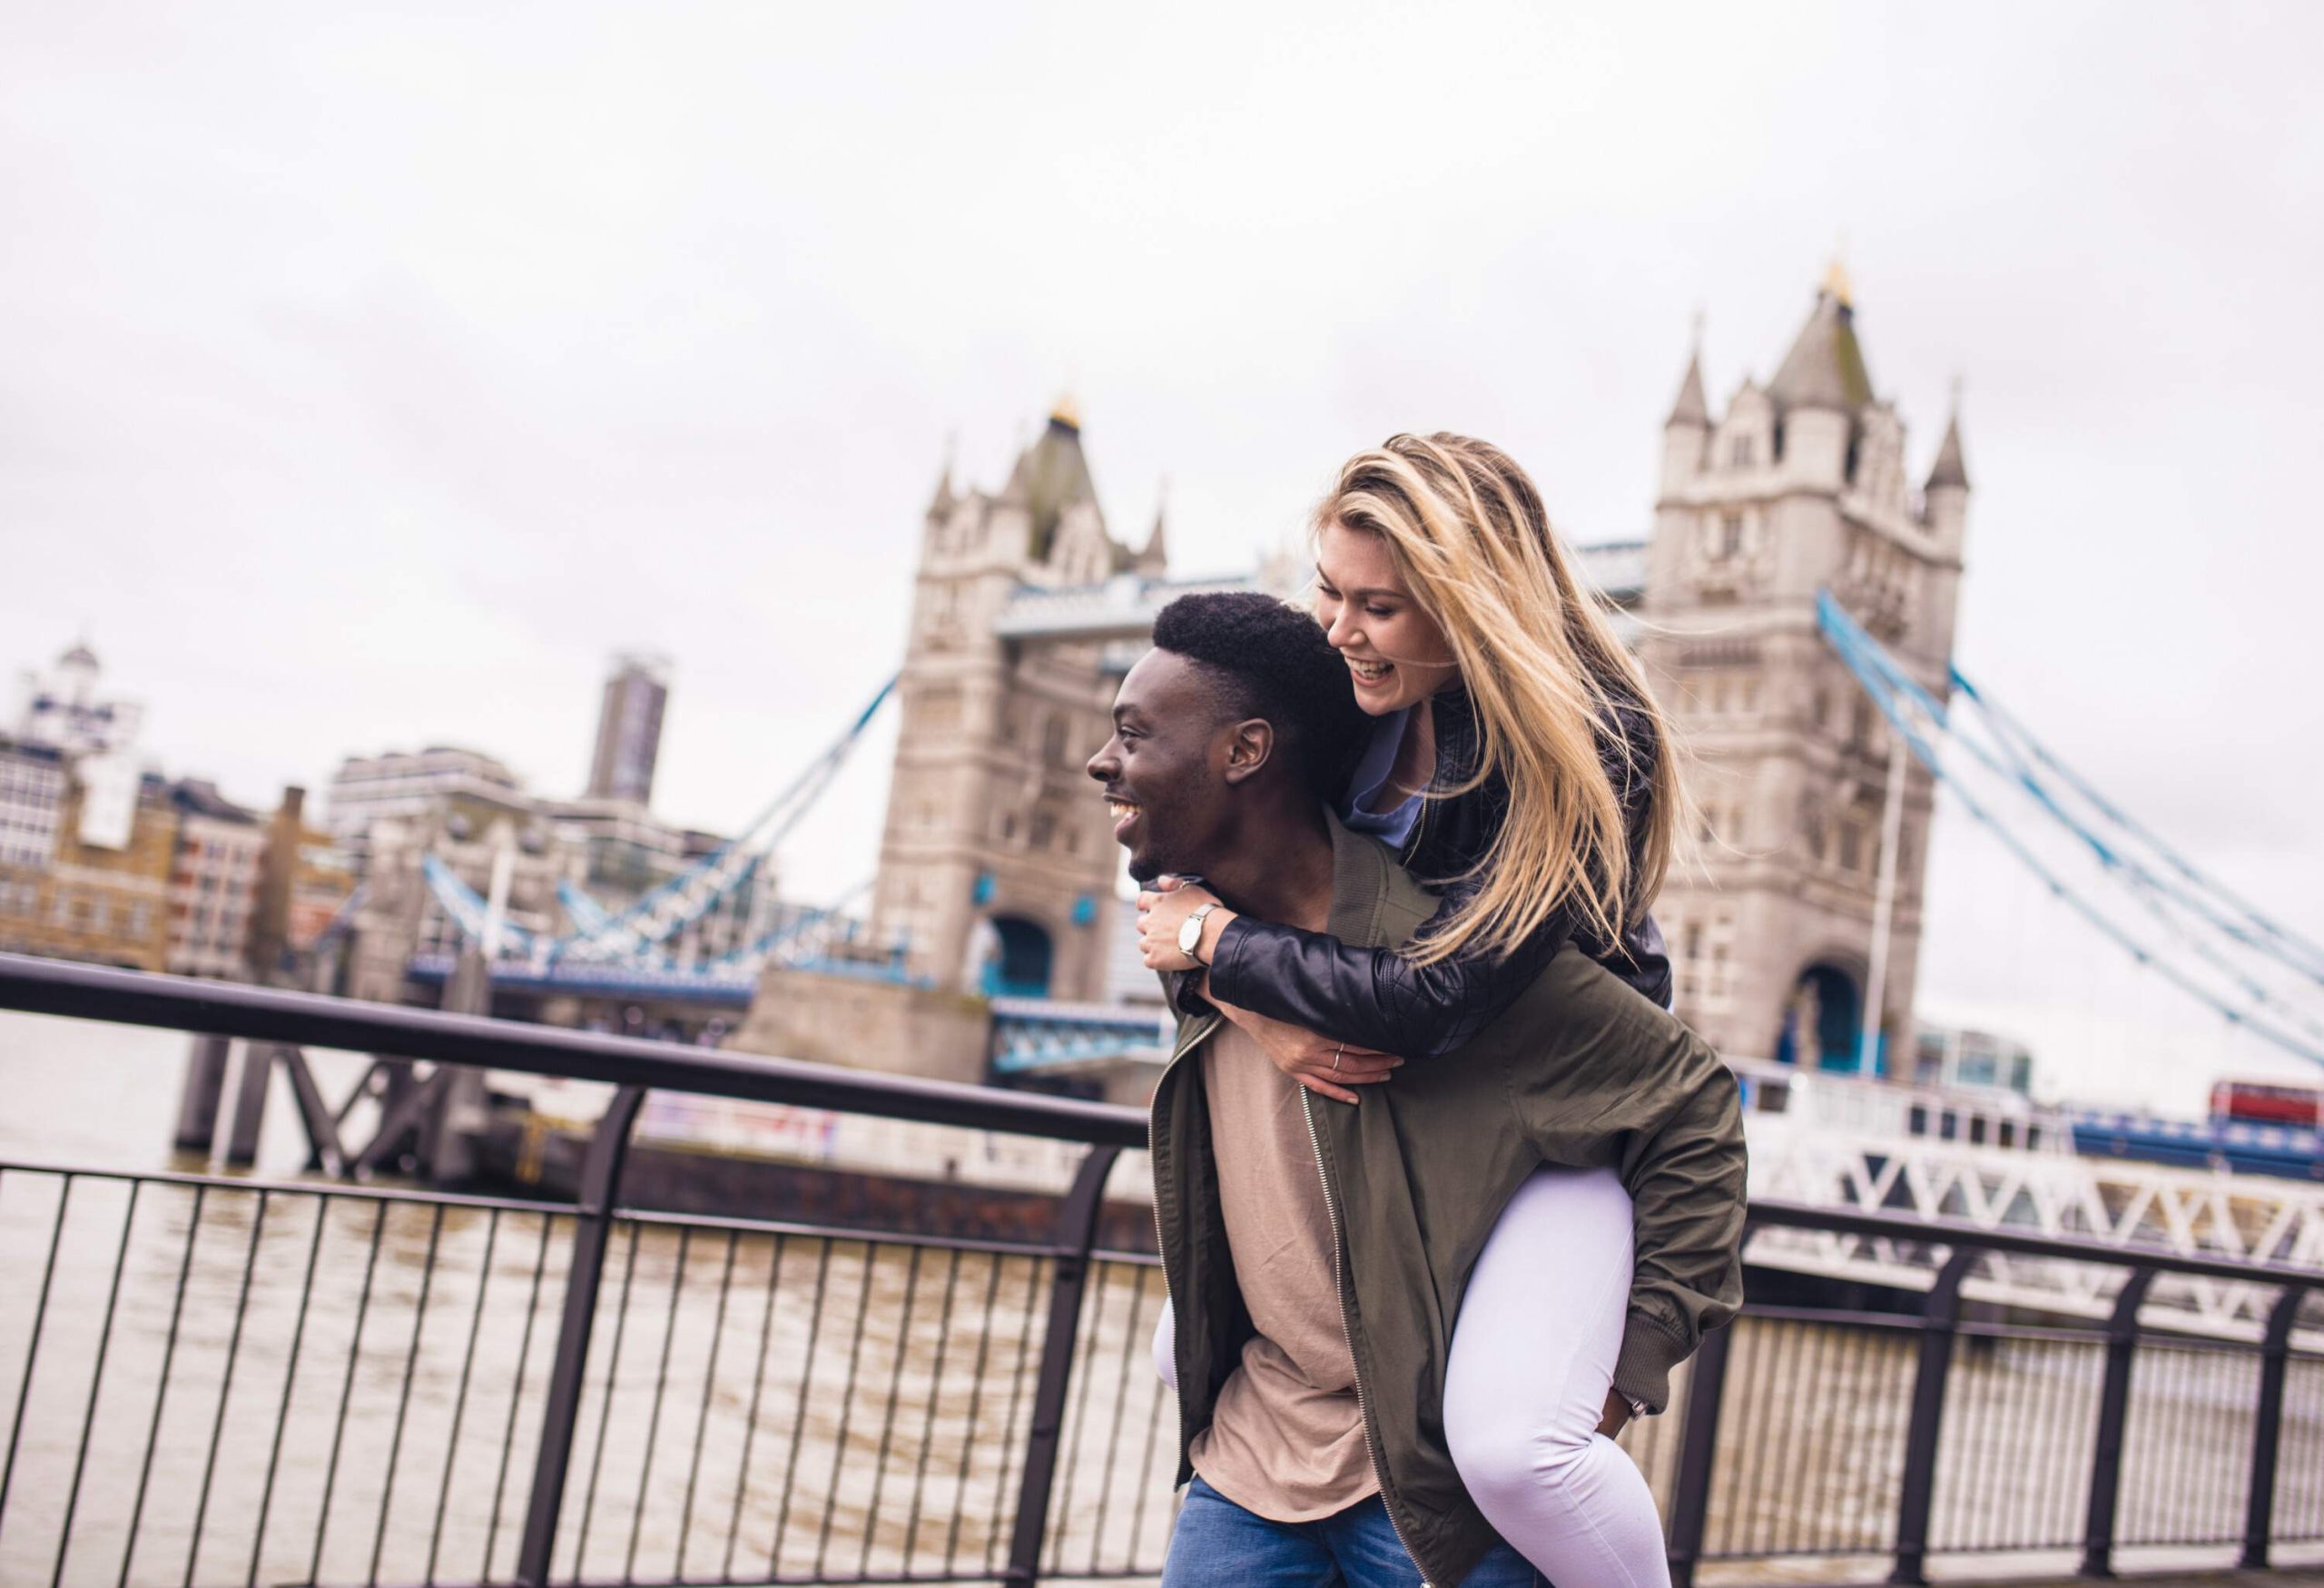 An out-of-focus river and the Tower Bridge form the background for a happy couple, with the woman riding on the man's back.